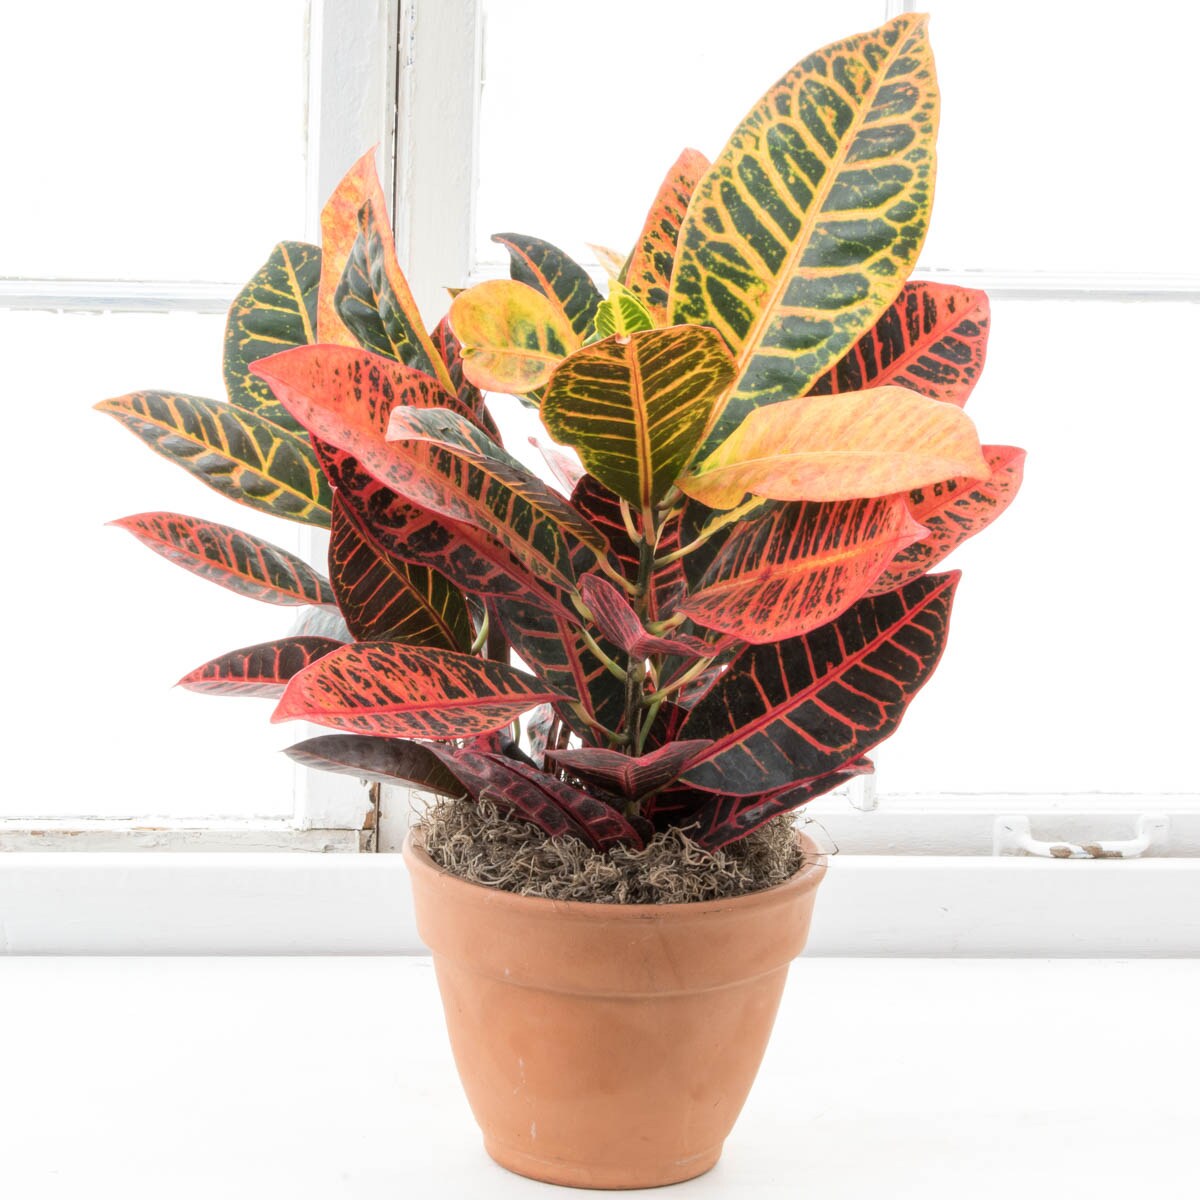 A Colorful Tropical That is Ideal for Bright Sun Location Indoors or in a Full Sun Patio Container in The Summer. Petra Croton Tropical Plant in a 4 inch Pot